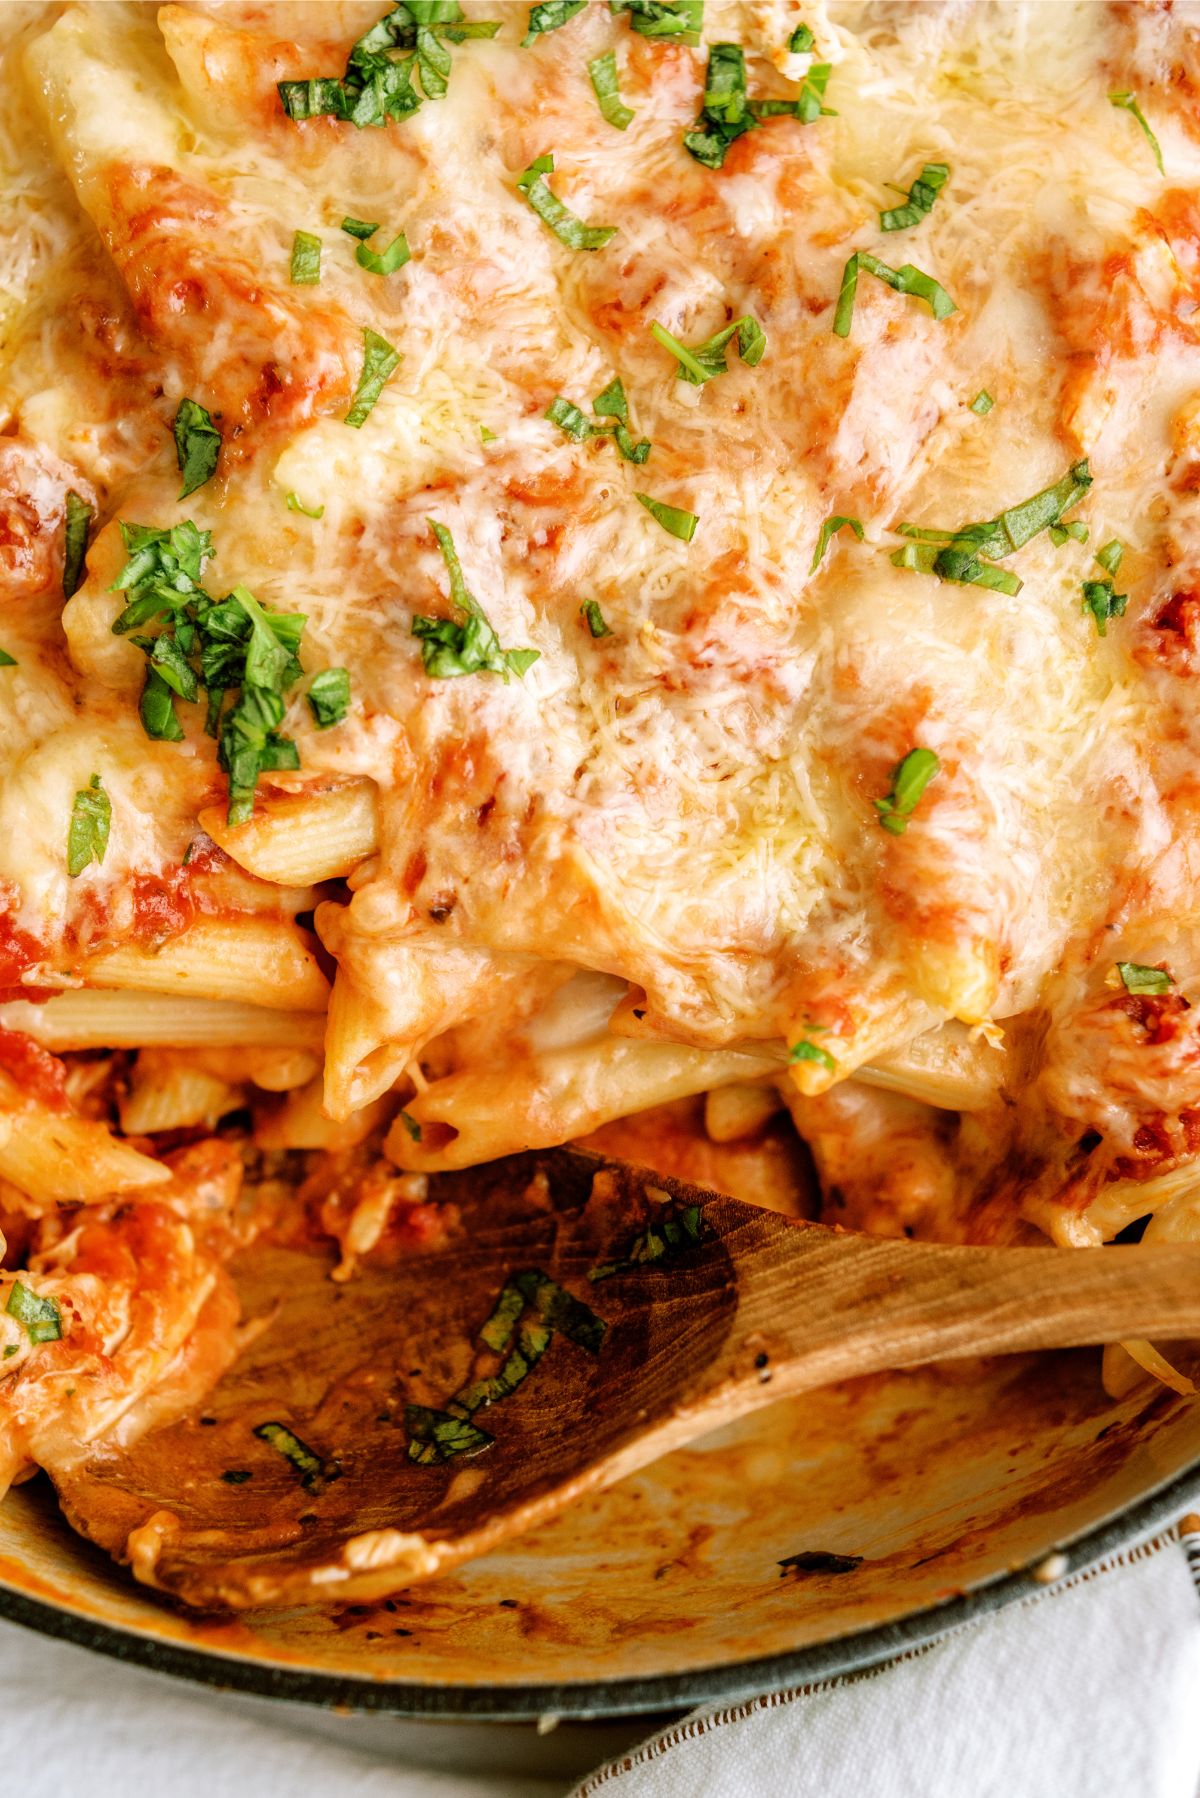 Top view of Pink Sauce Chicken Pasta Bake in a baking dish with a serving spoon